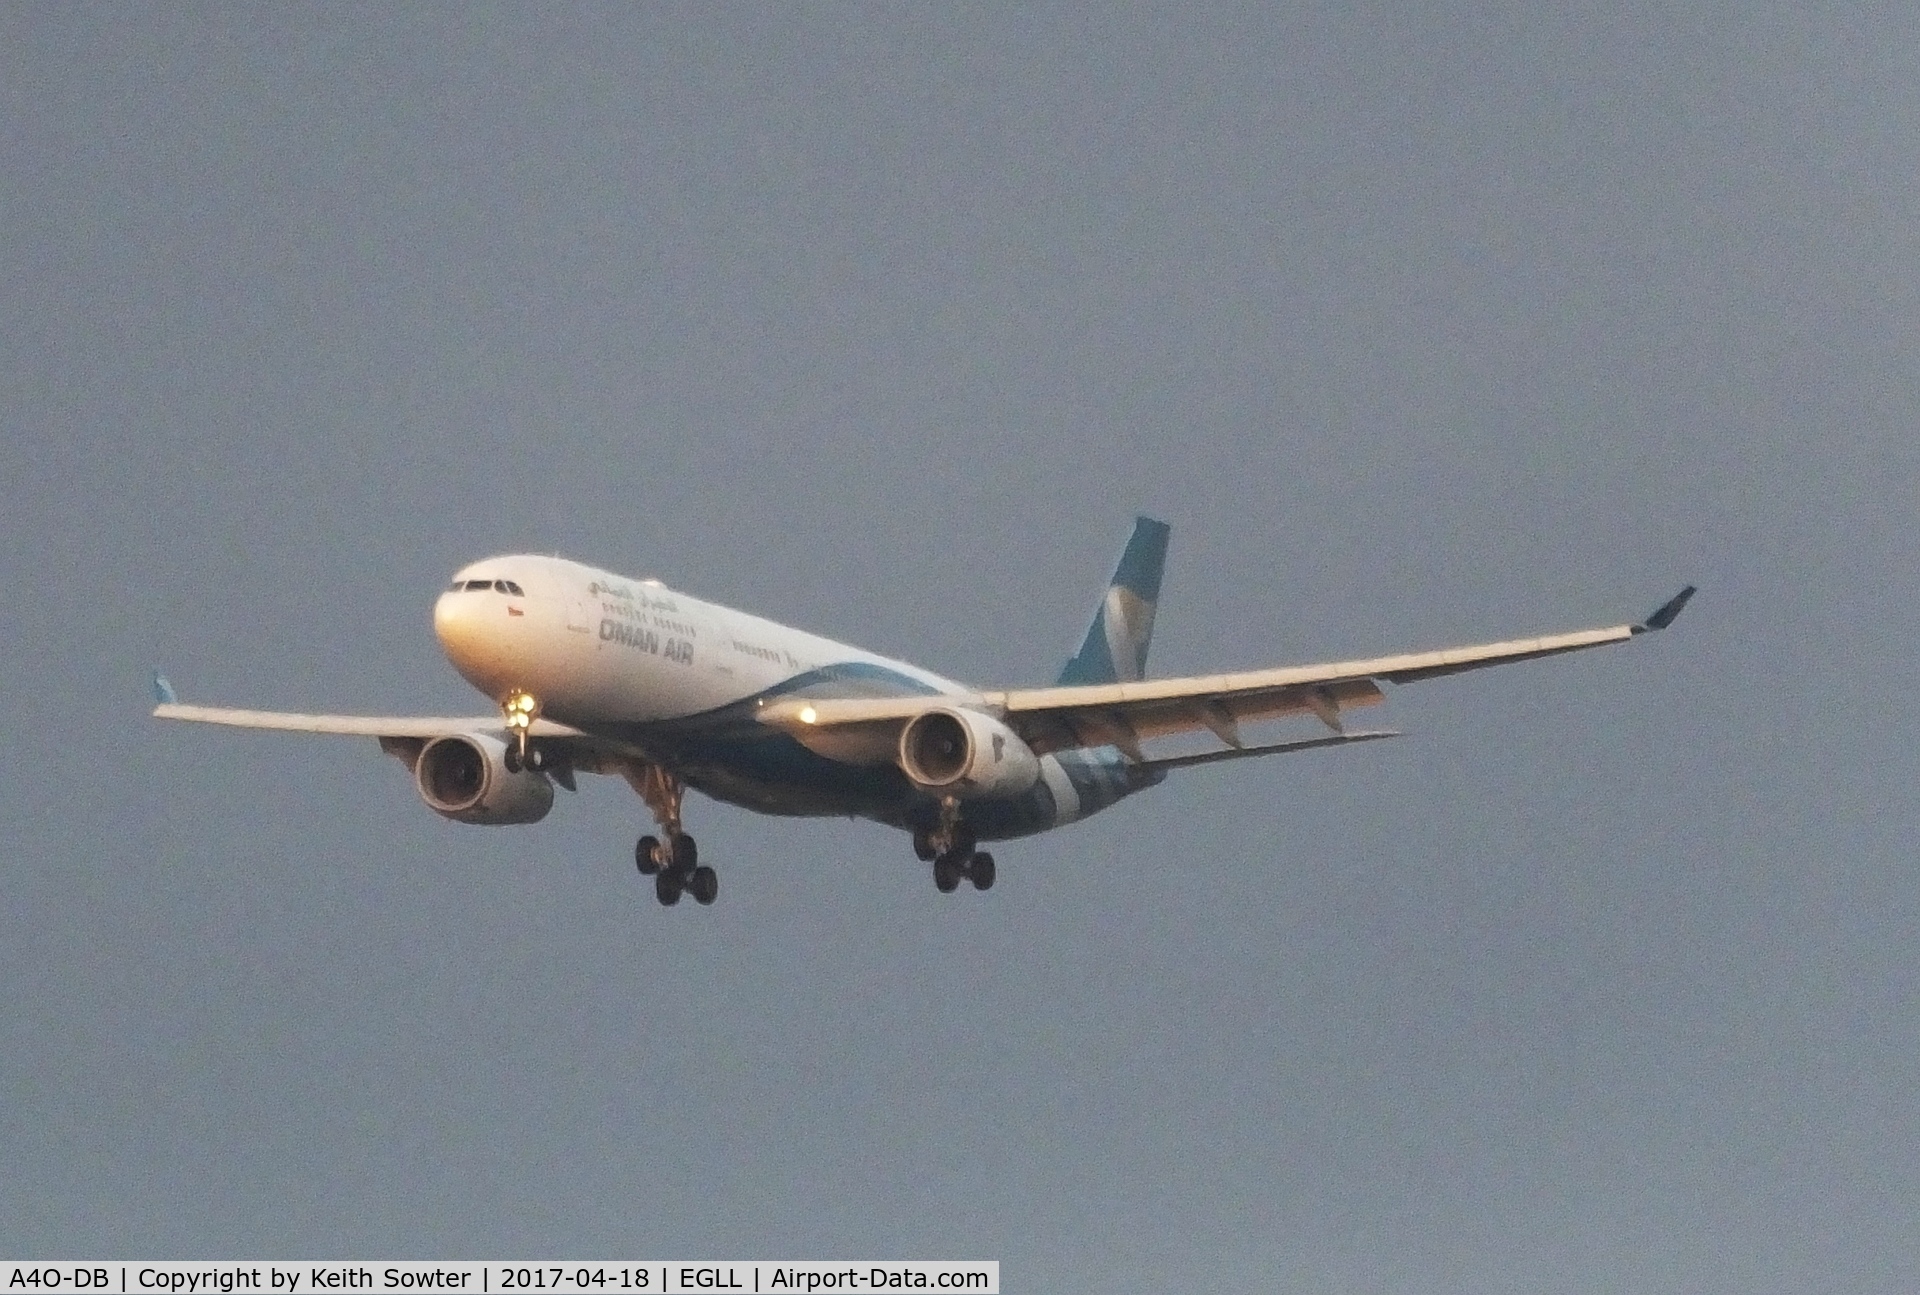 A4O-DB, 2009 Airbus A330-343 C/N 1044, Short finals to land on runway 09L at Heathrow